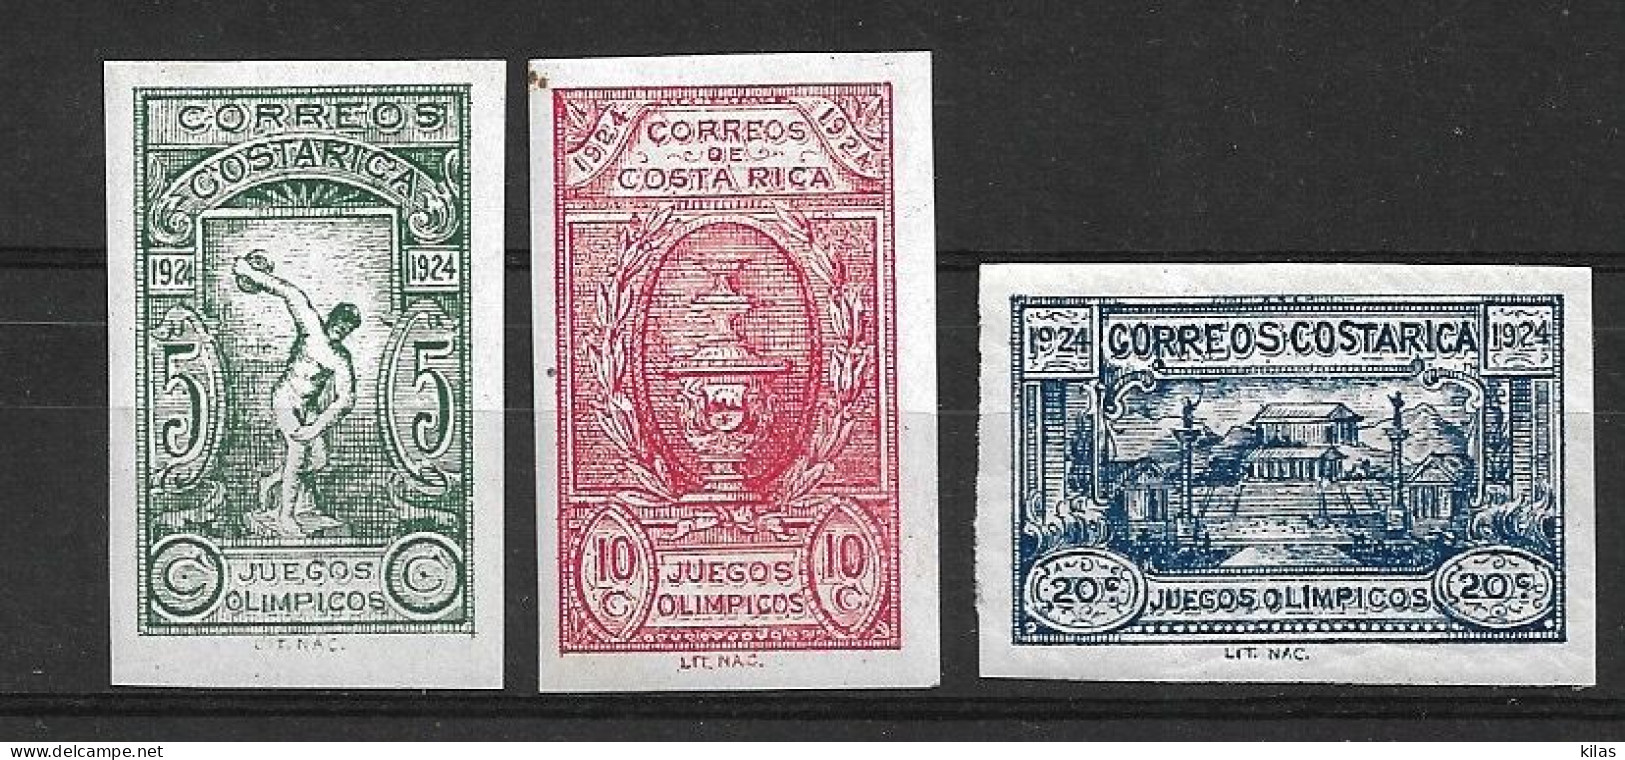 COSTA RICA 1924 OLYMPIC GAMES OF San José Imperforated MNH - Costa Rica